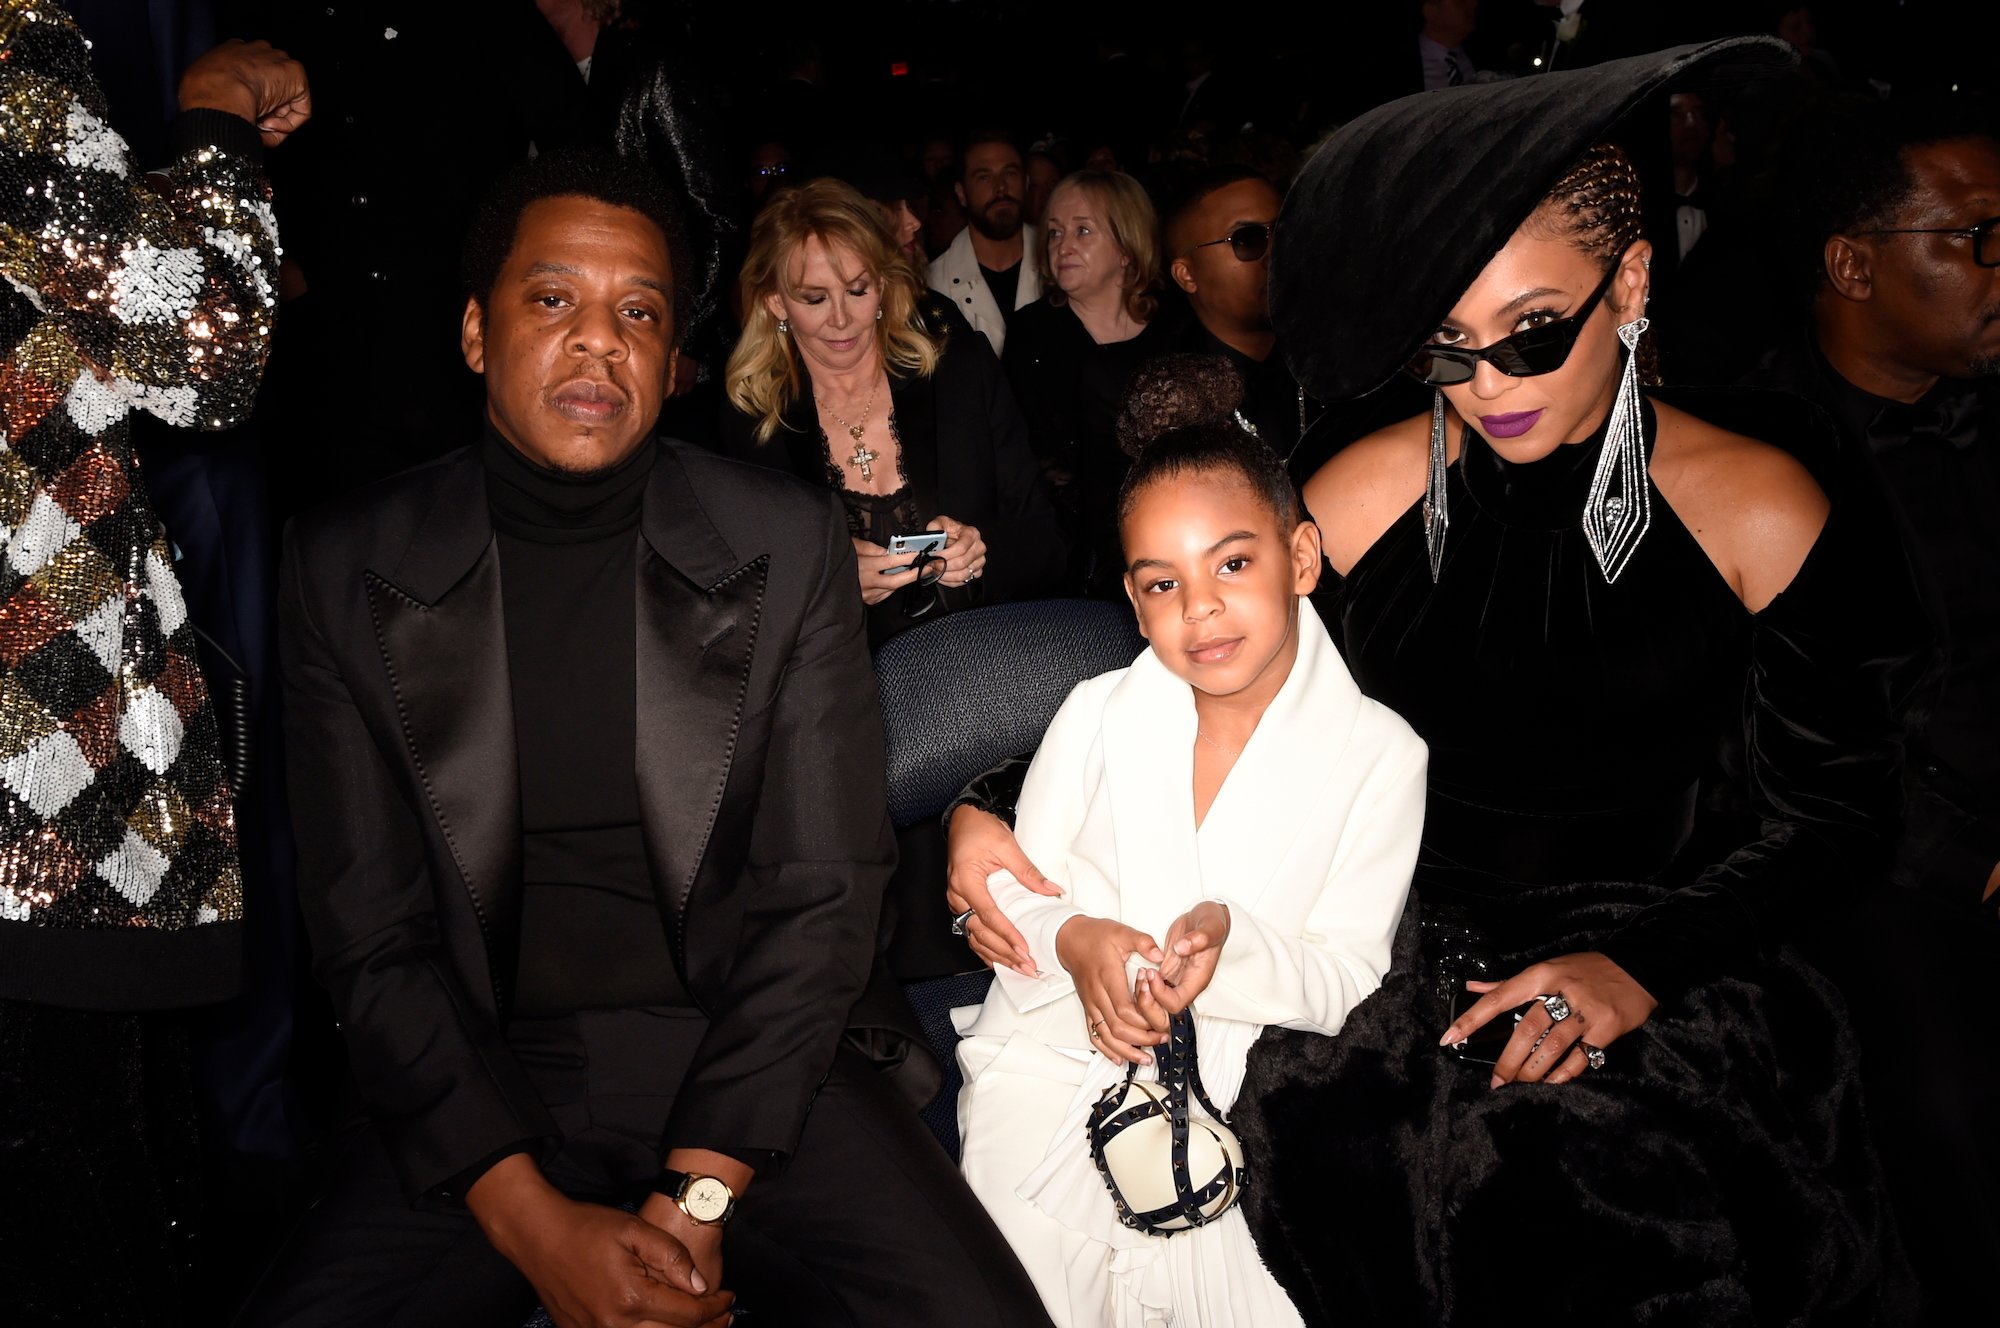 (L-R) Jay-Z, Blue Ivy, and Beyoncé looking at the camera, seated in a theater